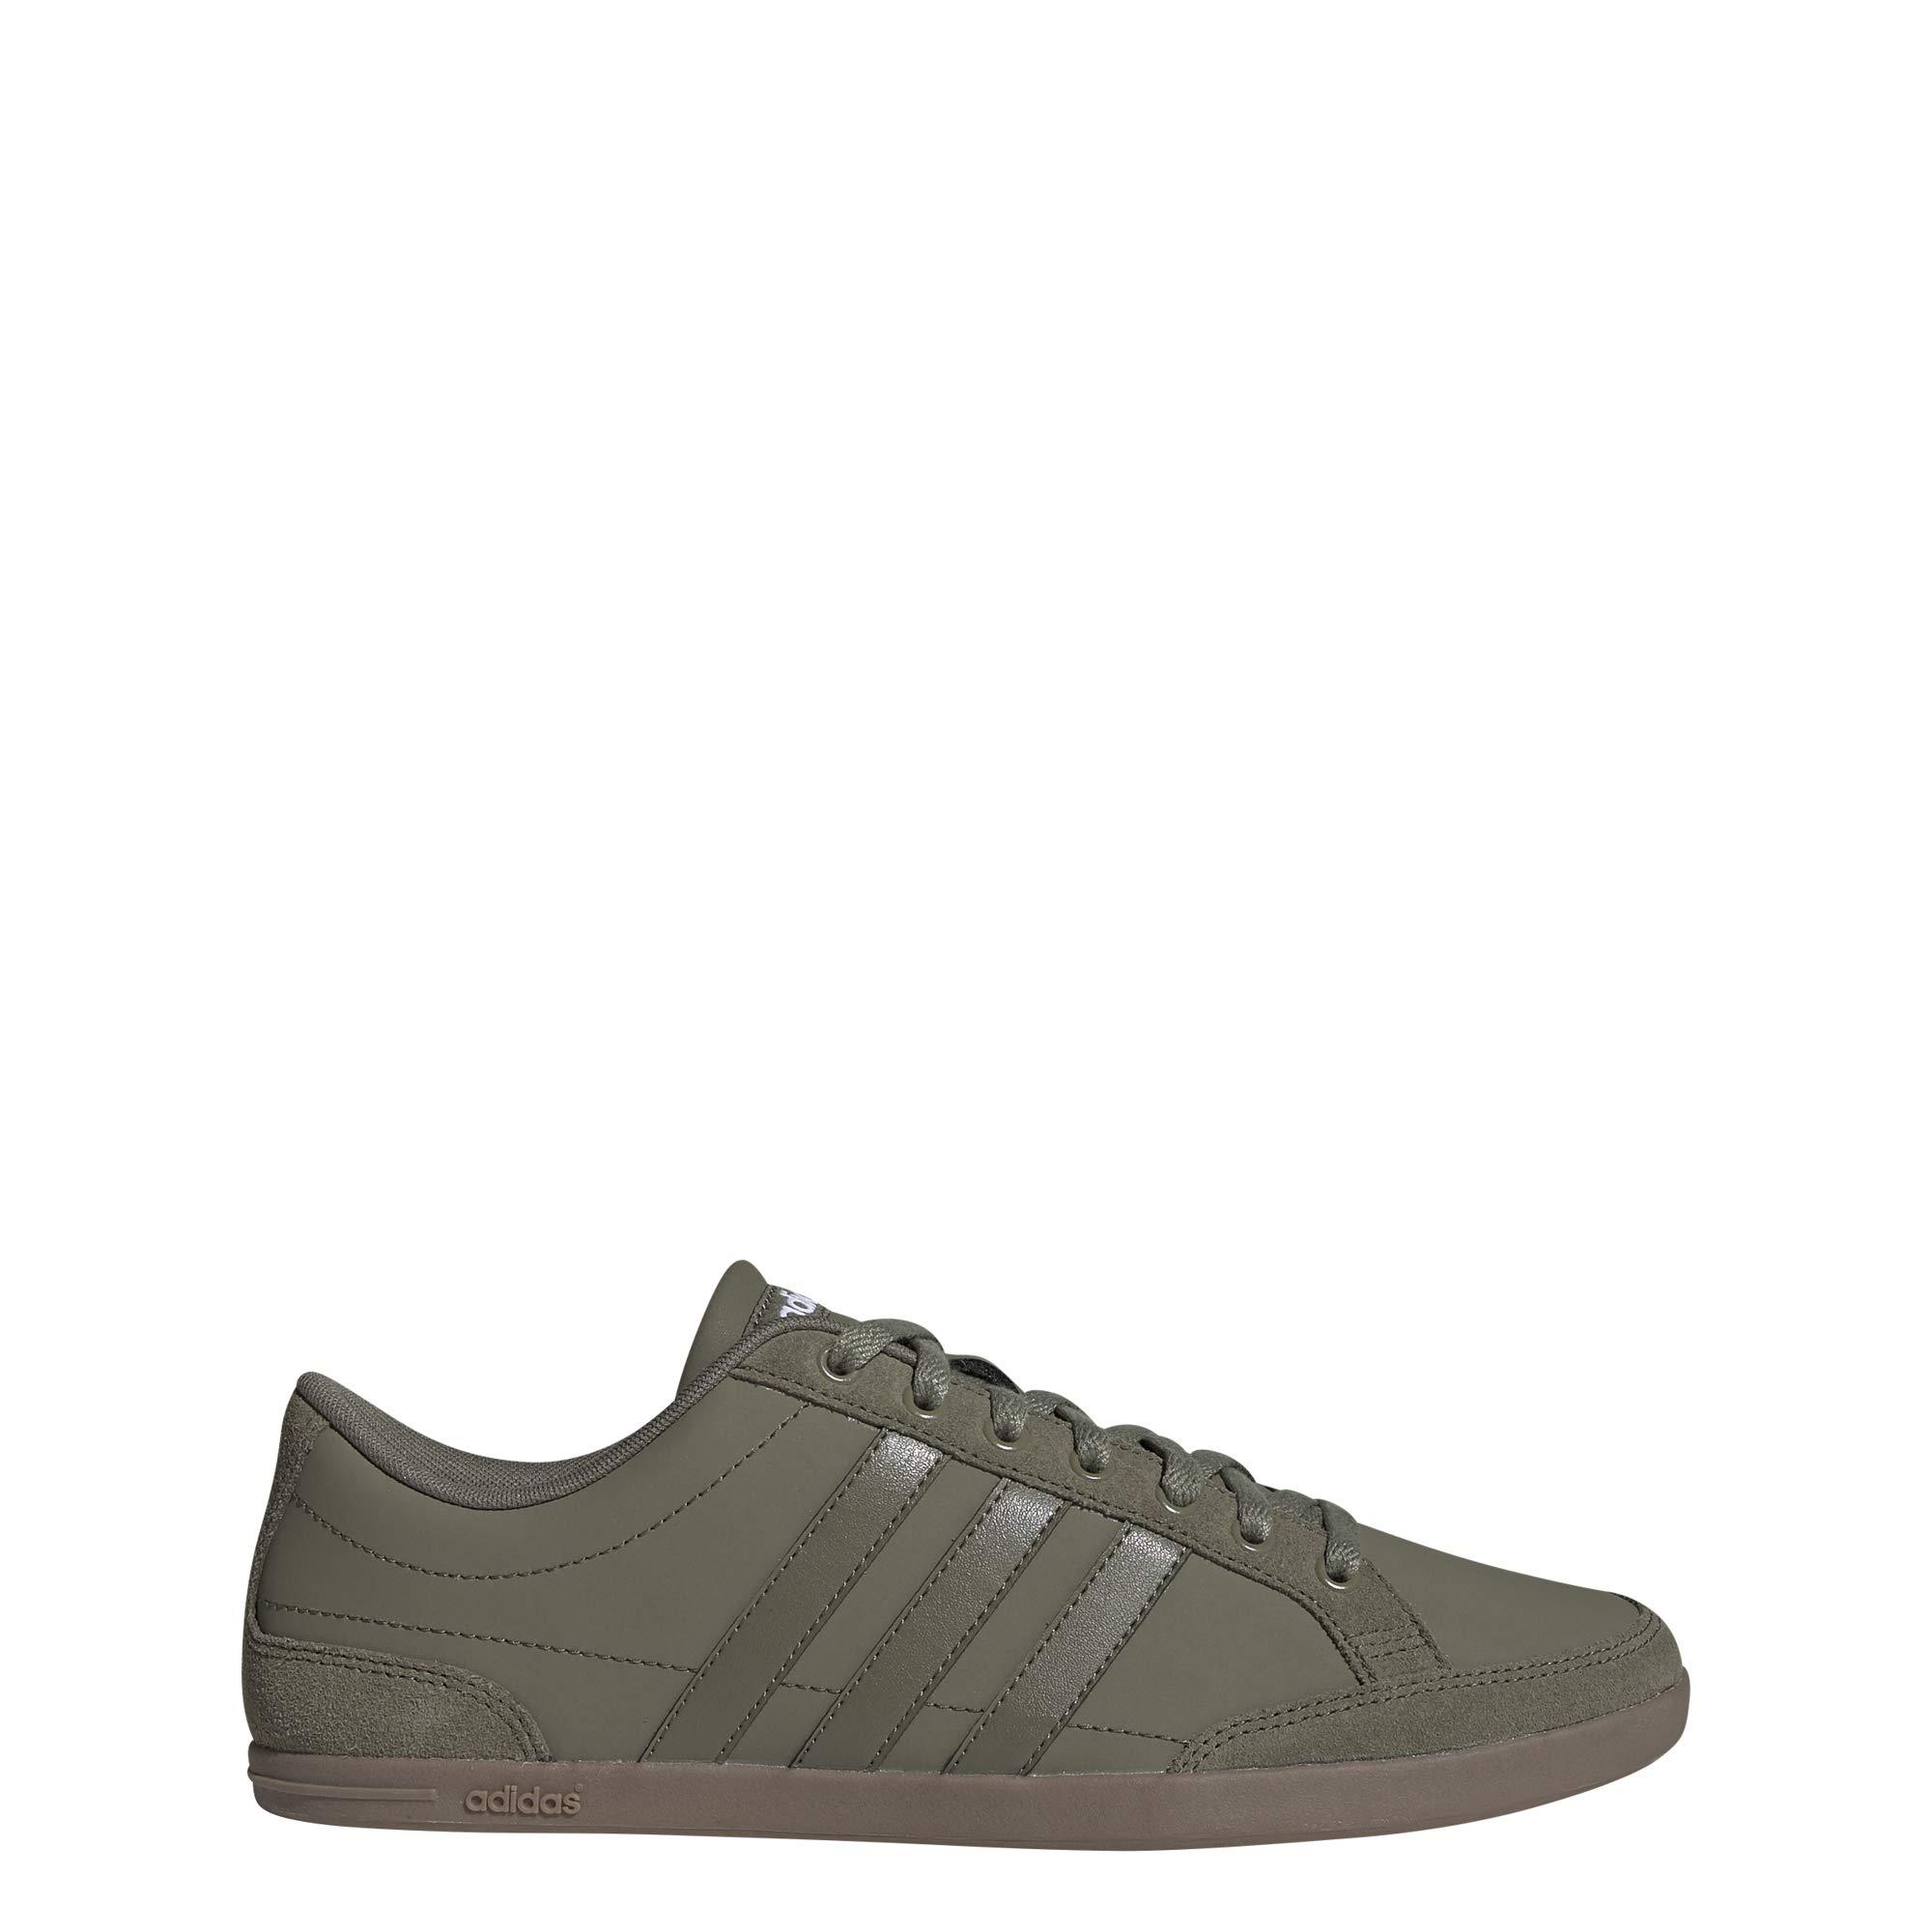 adidas caflaire trainers white